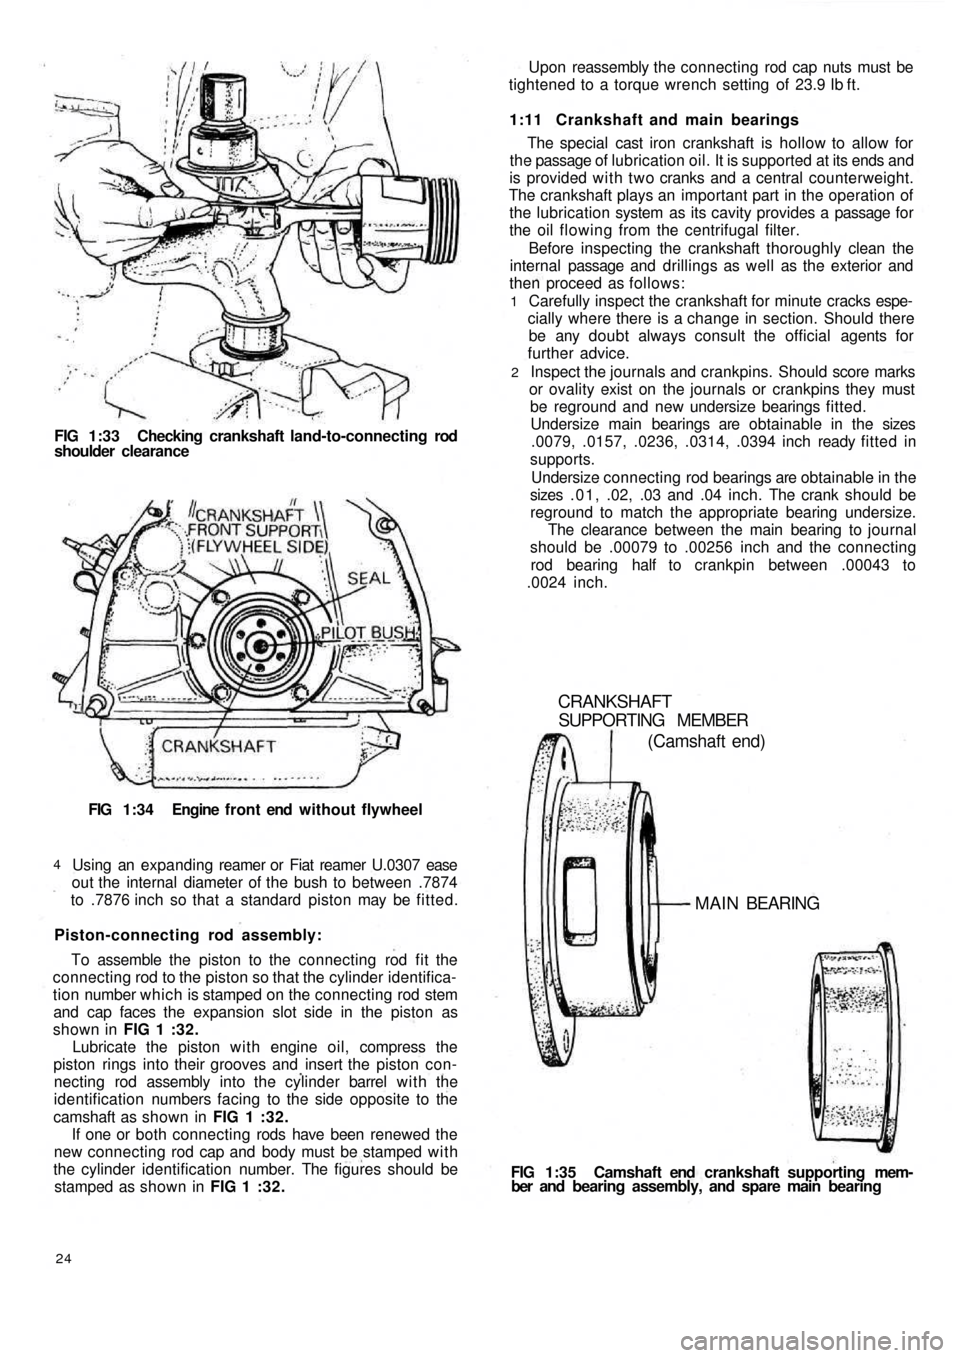 FIAT 500 1960 1.G Workshop Manual FIG 1:33 Checking crankshaft land-to-connecting rod
shoulder clearance
FIG 1:34 Engine  f r o n t  end  without flywheel
Using an expanding reamer or Fiat reamer U.0307 ease
out the internal diameter 